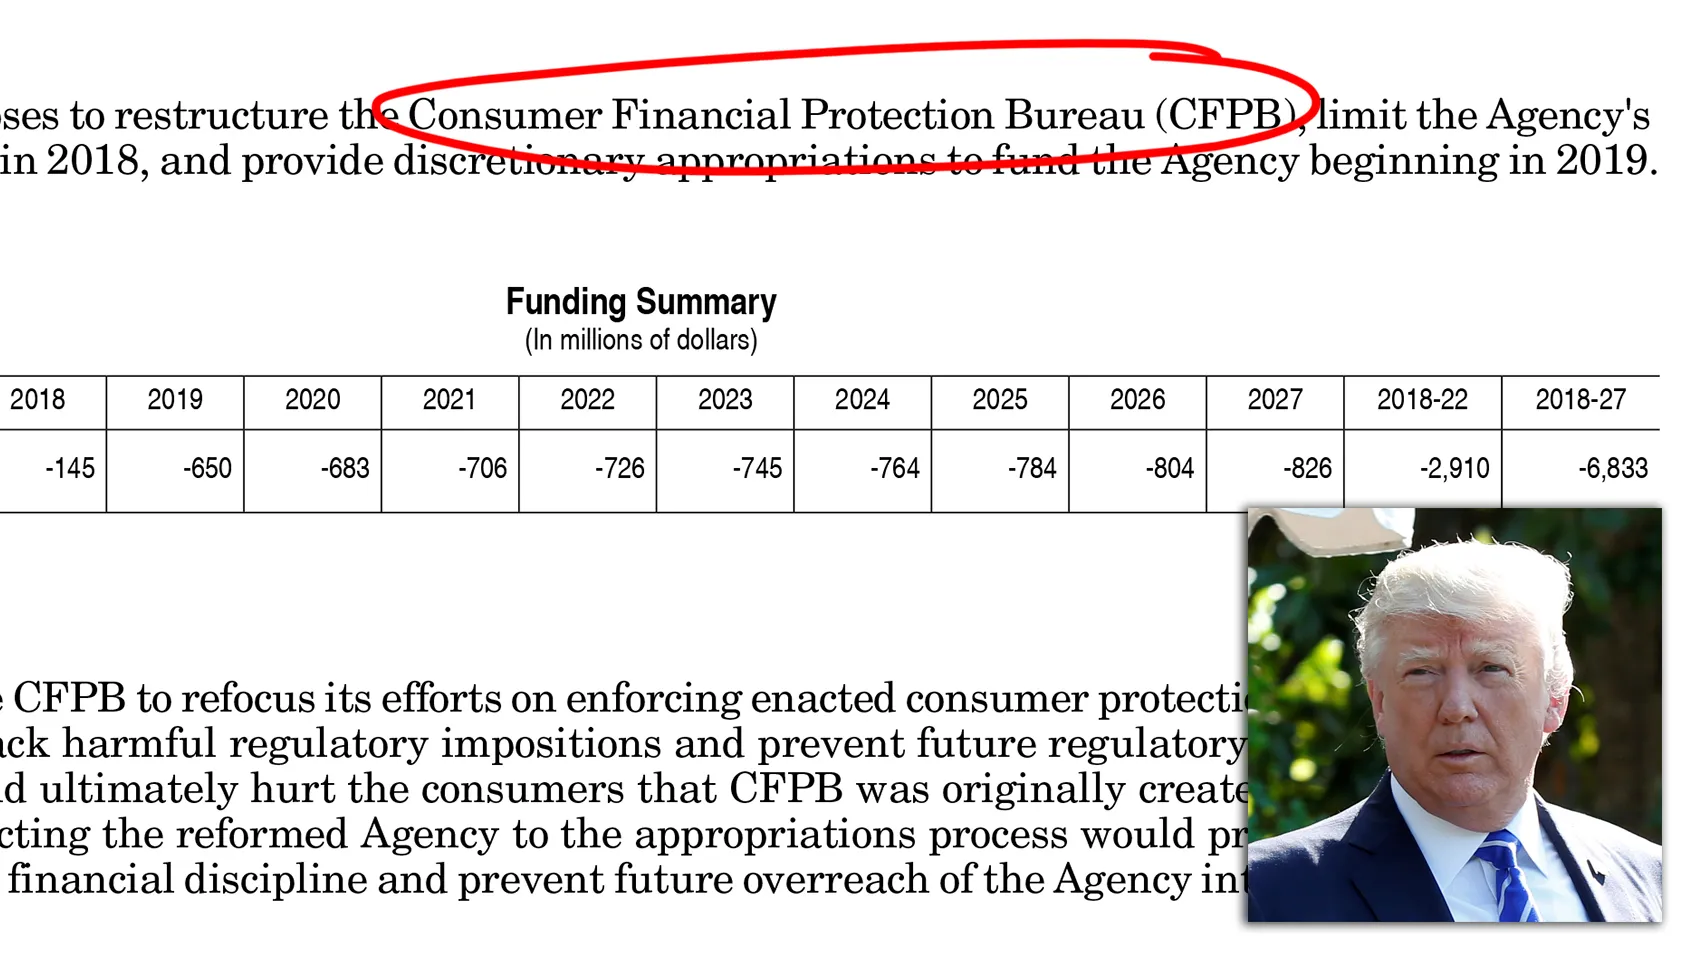 CFPB Under Fire: Trump Budget Would Slash Funding For Consumer